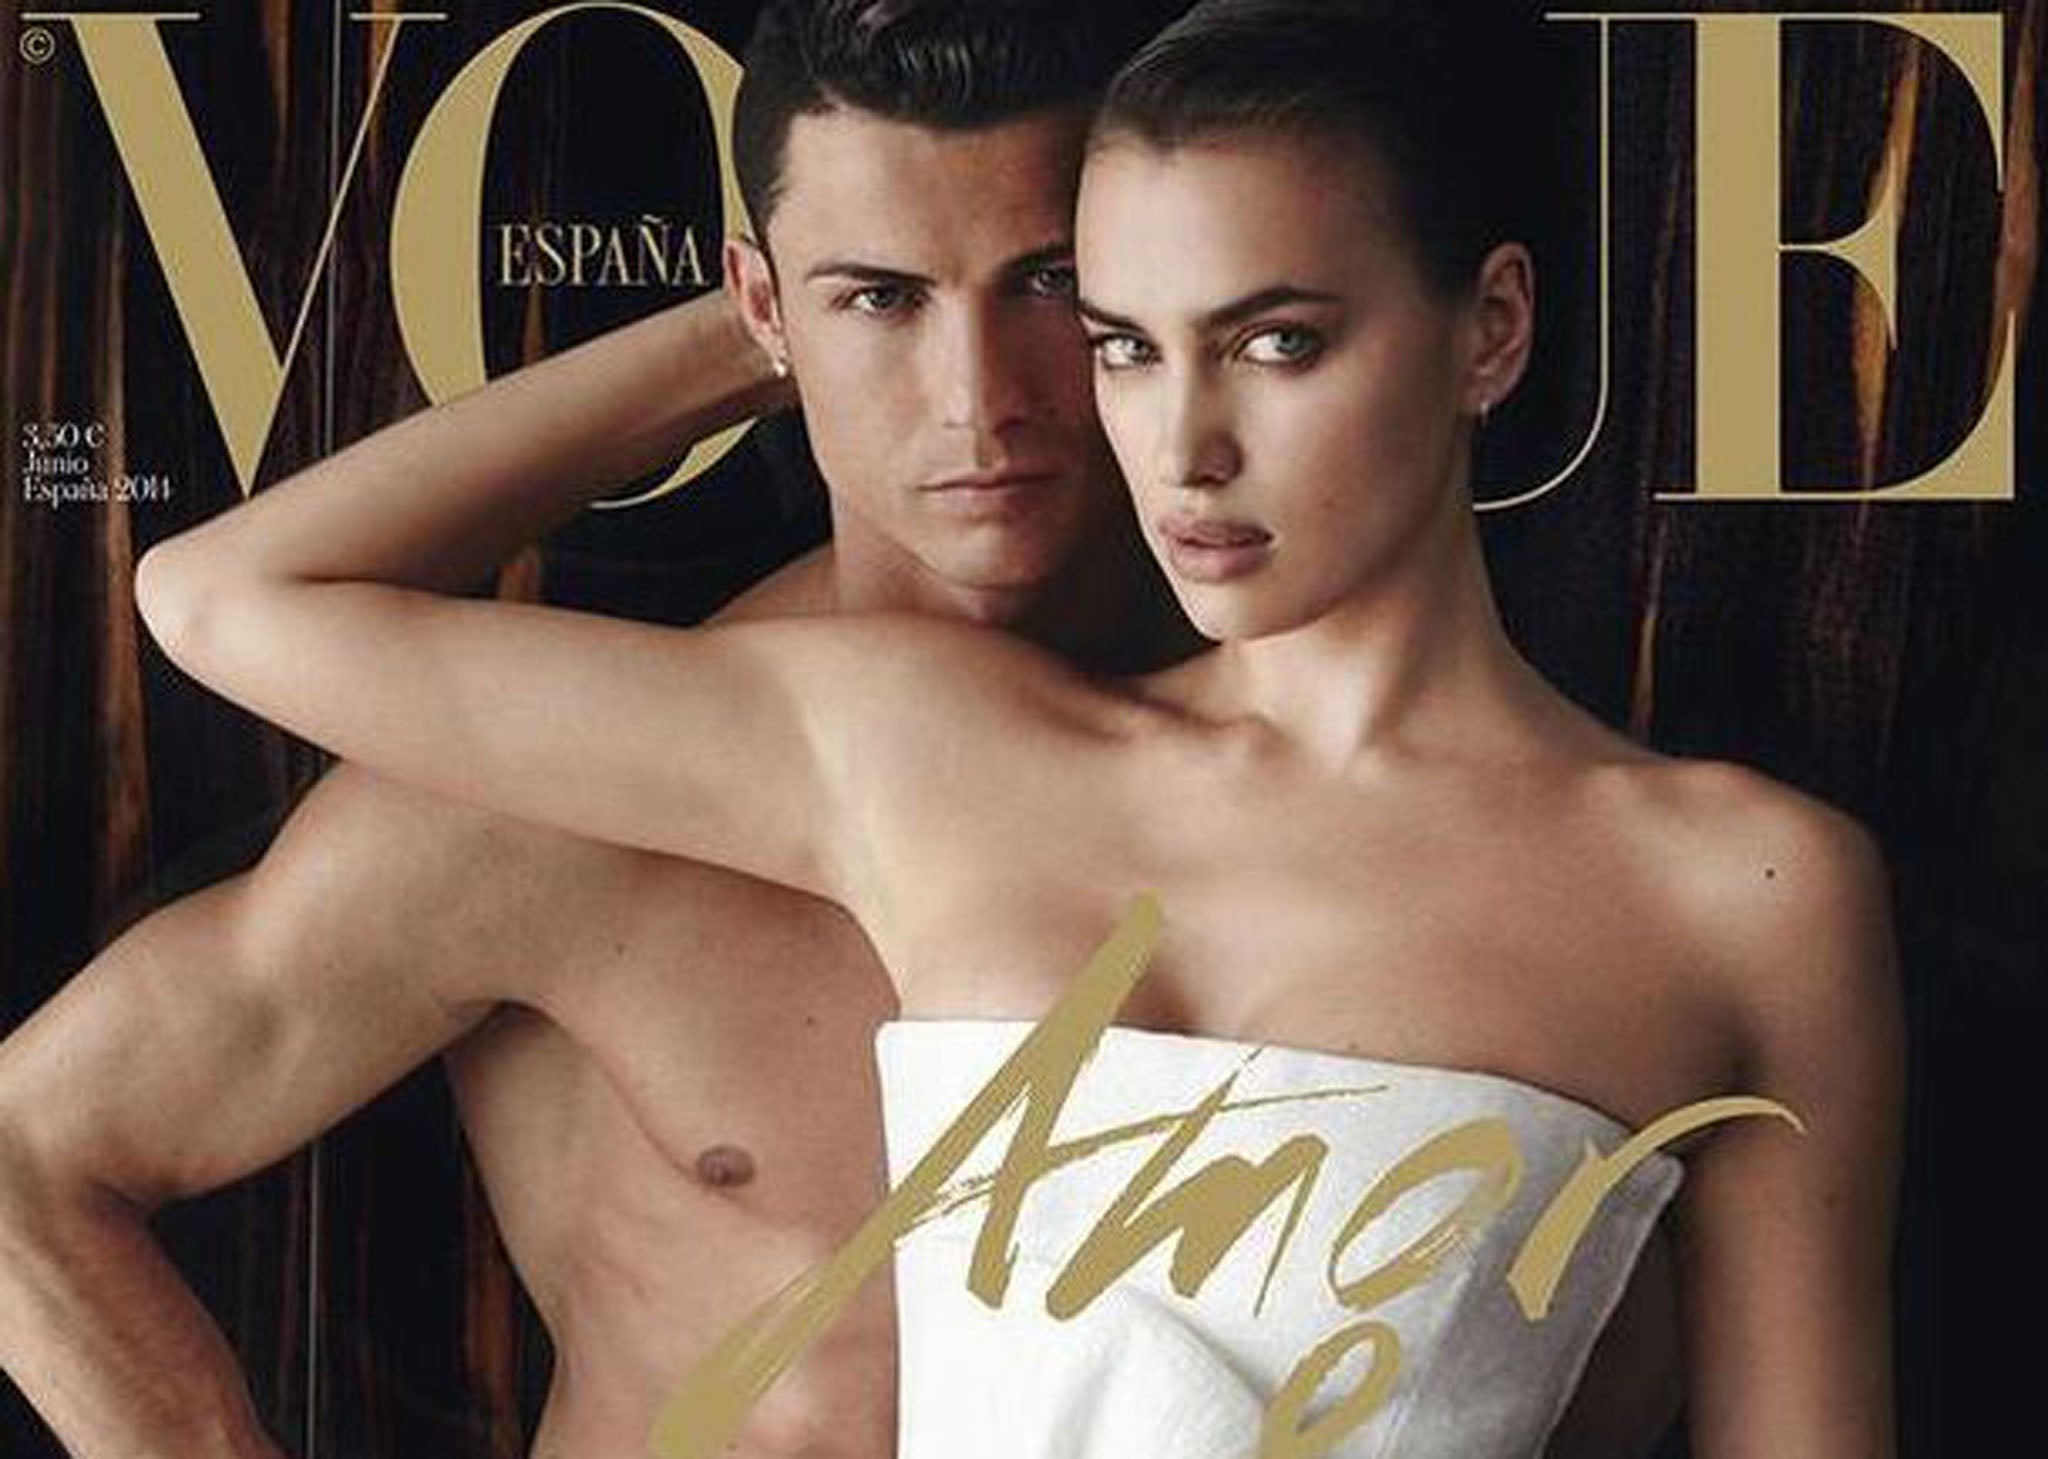 Cristiano Ronaldo naked on the cover of Vogue Real Madrid star strikes pose that would make Zoolander deeply envious The Independent The Independent image